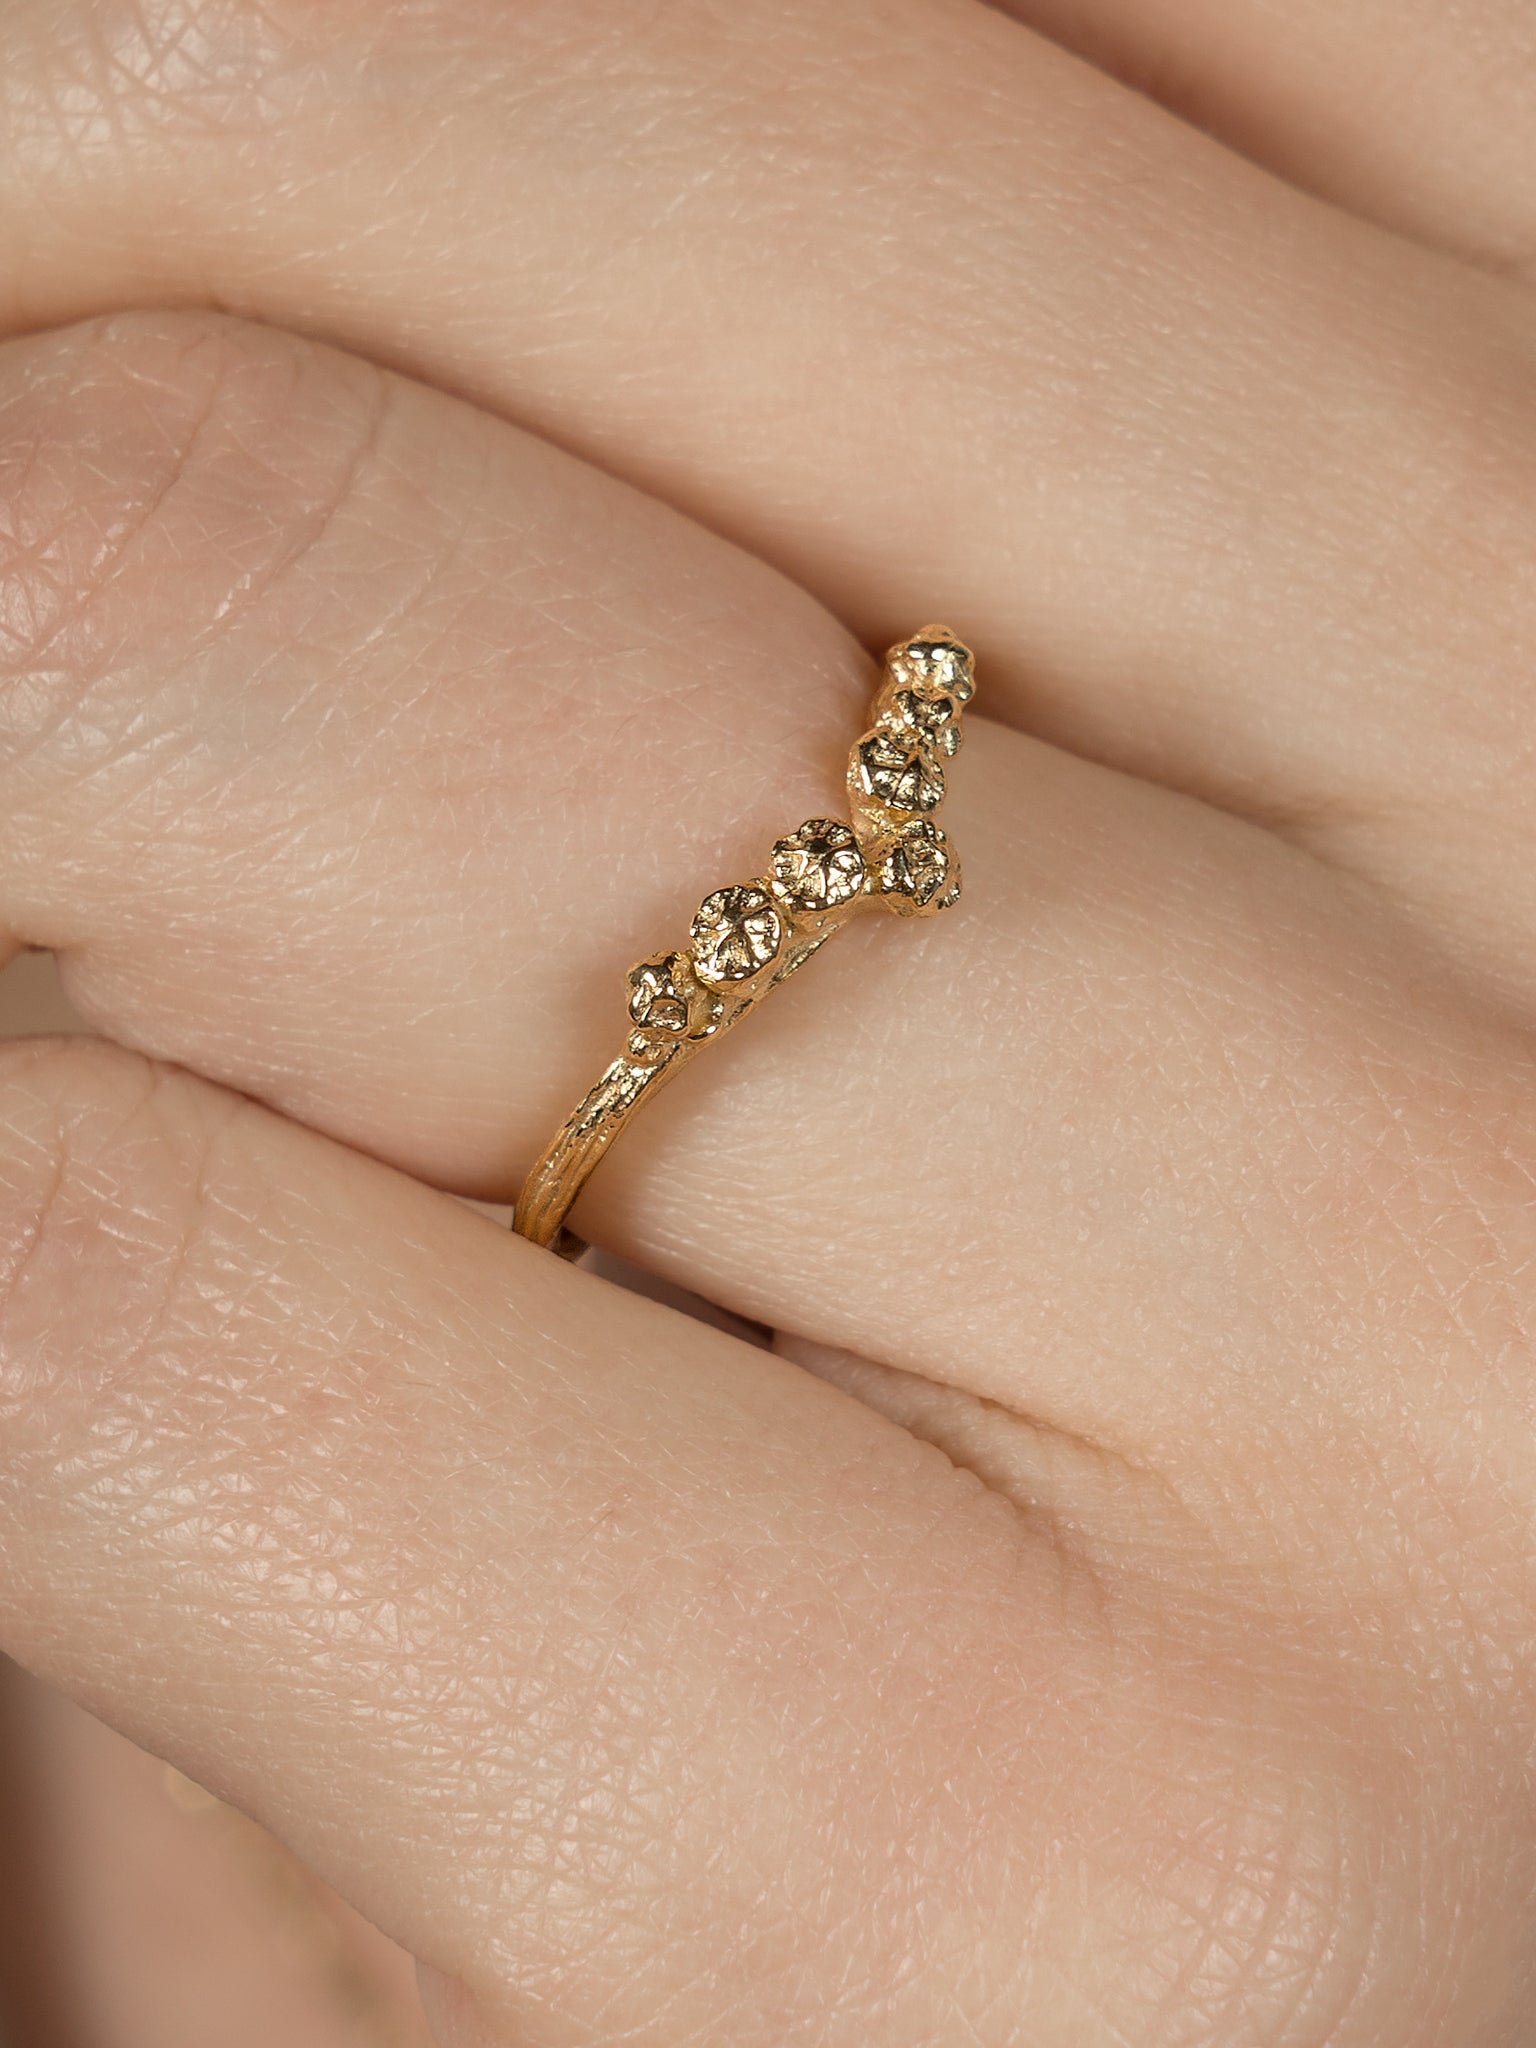 Chevron V shape gold ring cast from twigs and berries close up being worn on hand